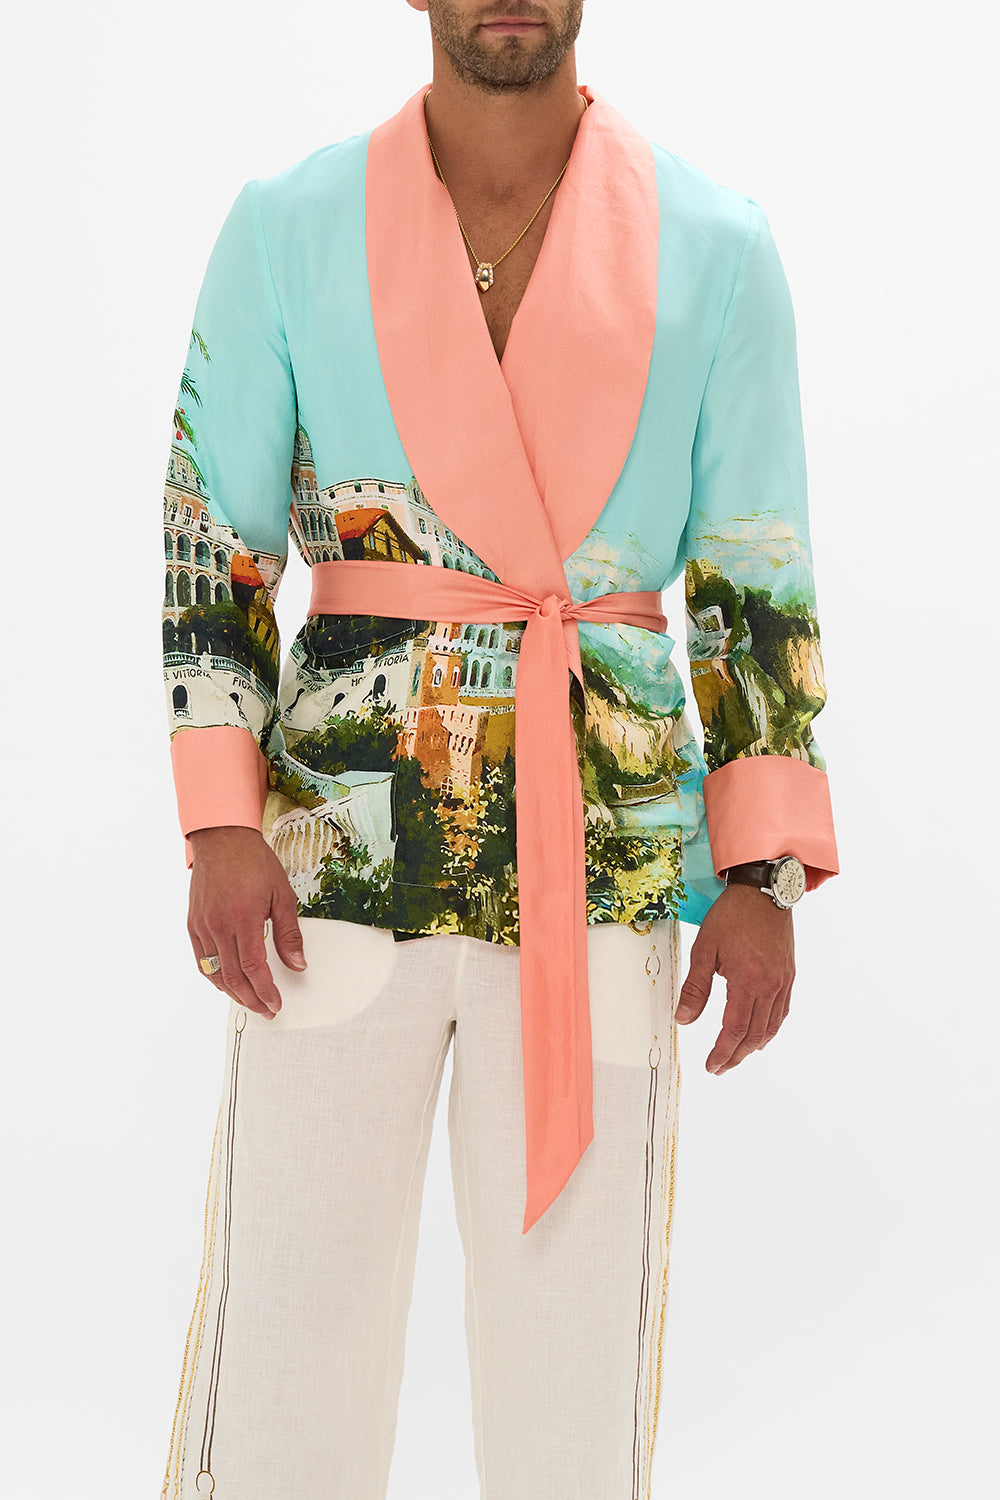 MEN'S ROBE JACKET FROM SORRENTO WITH LOVE